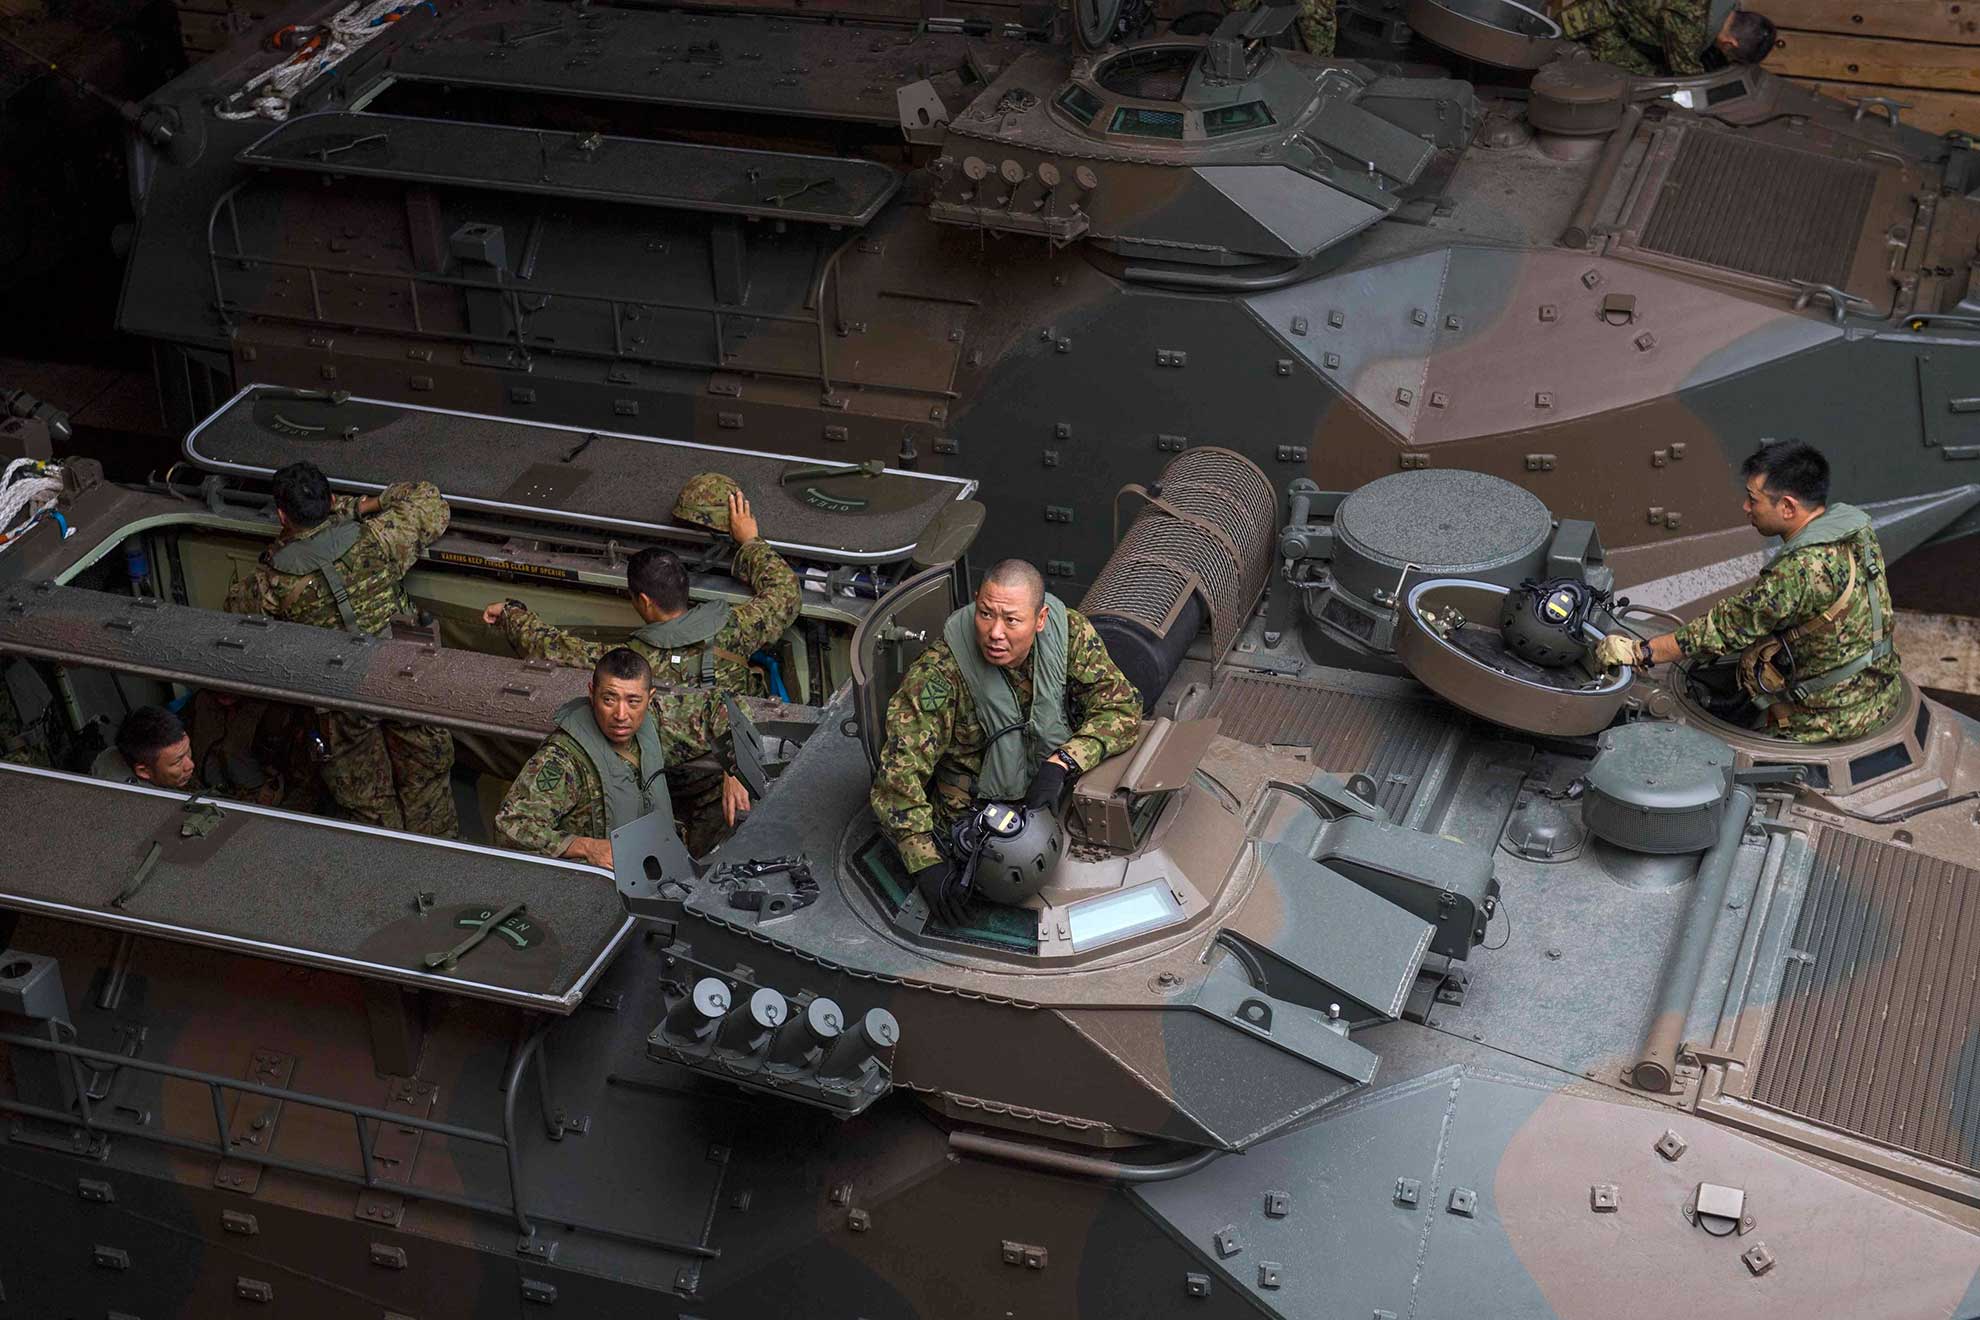 Subic bay, Republic of the Philippines (Oct. 2, 2018) Marines from the Japan Ground Self-Defense Force (JGSDF) Amphibious Rapid Deployment Brigade (ARDB) stand by inside the well deck of the amphibious dock landing ship USS Ashland (LSD 48). Ashland, part of the Wasp Amphibious Ready Group U.S. Navy photo by MCS Joshua Mortensen. -